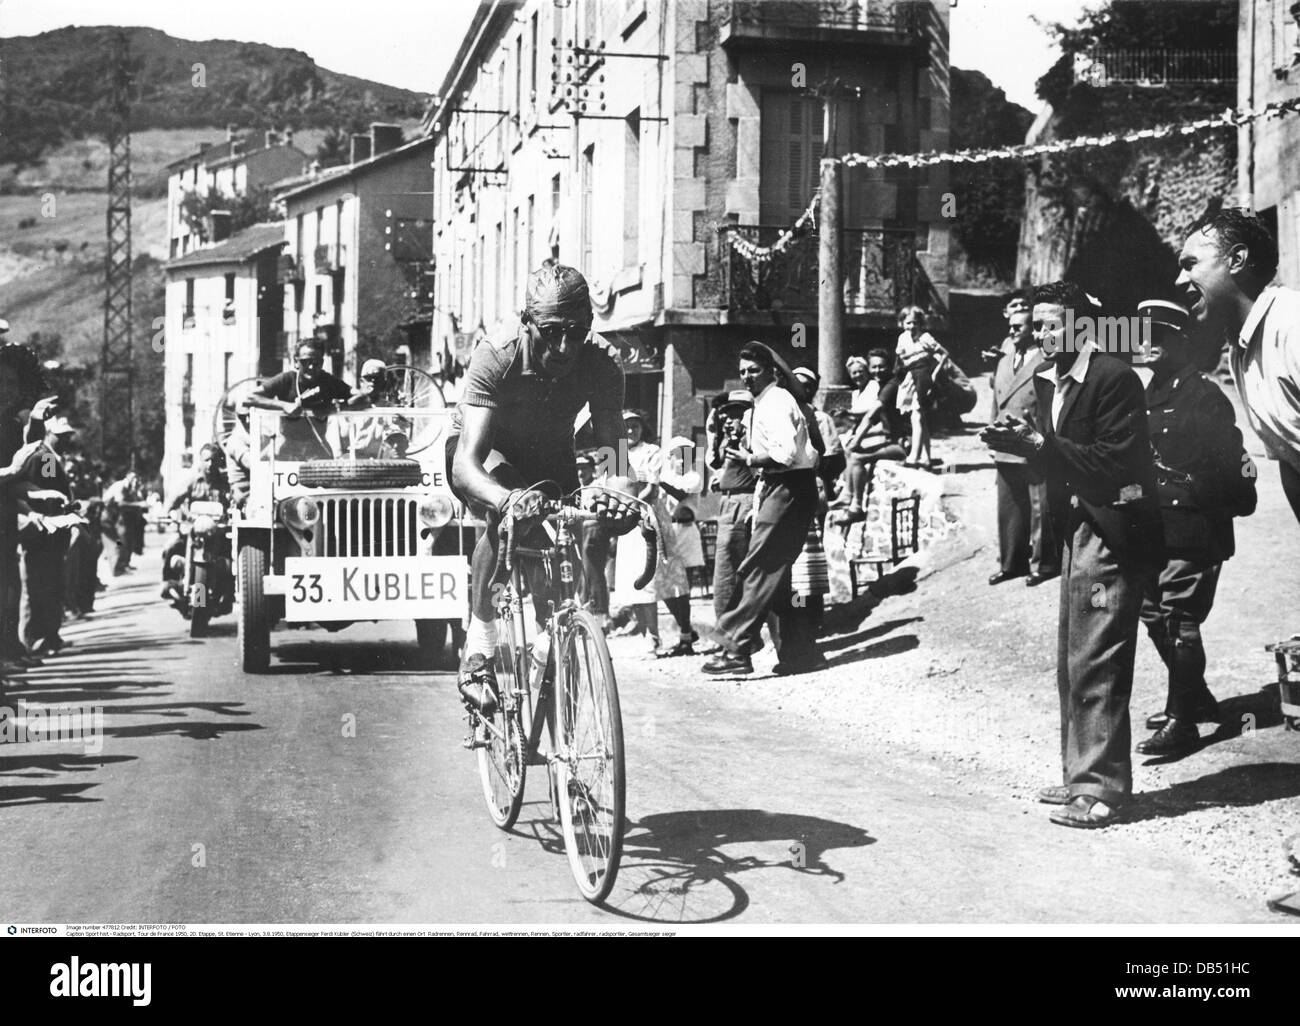 sports, cycling, Tour de France 1950, stage 20, St. Etienne - Lyon, stage winner Ferdi Kübler (Switzerland) driving through a town, 3.8.1950, 1950s, 50s, 20th century, historic, historical, cycle race, cycle races, bicycle racing sport, athlete, athletes, cyclist, cyclists, overall winner, racing cyclist, bicycle racer, people, Additional-Rights-Clearences-Not Available Stock Photo